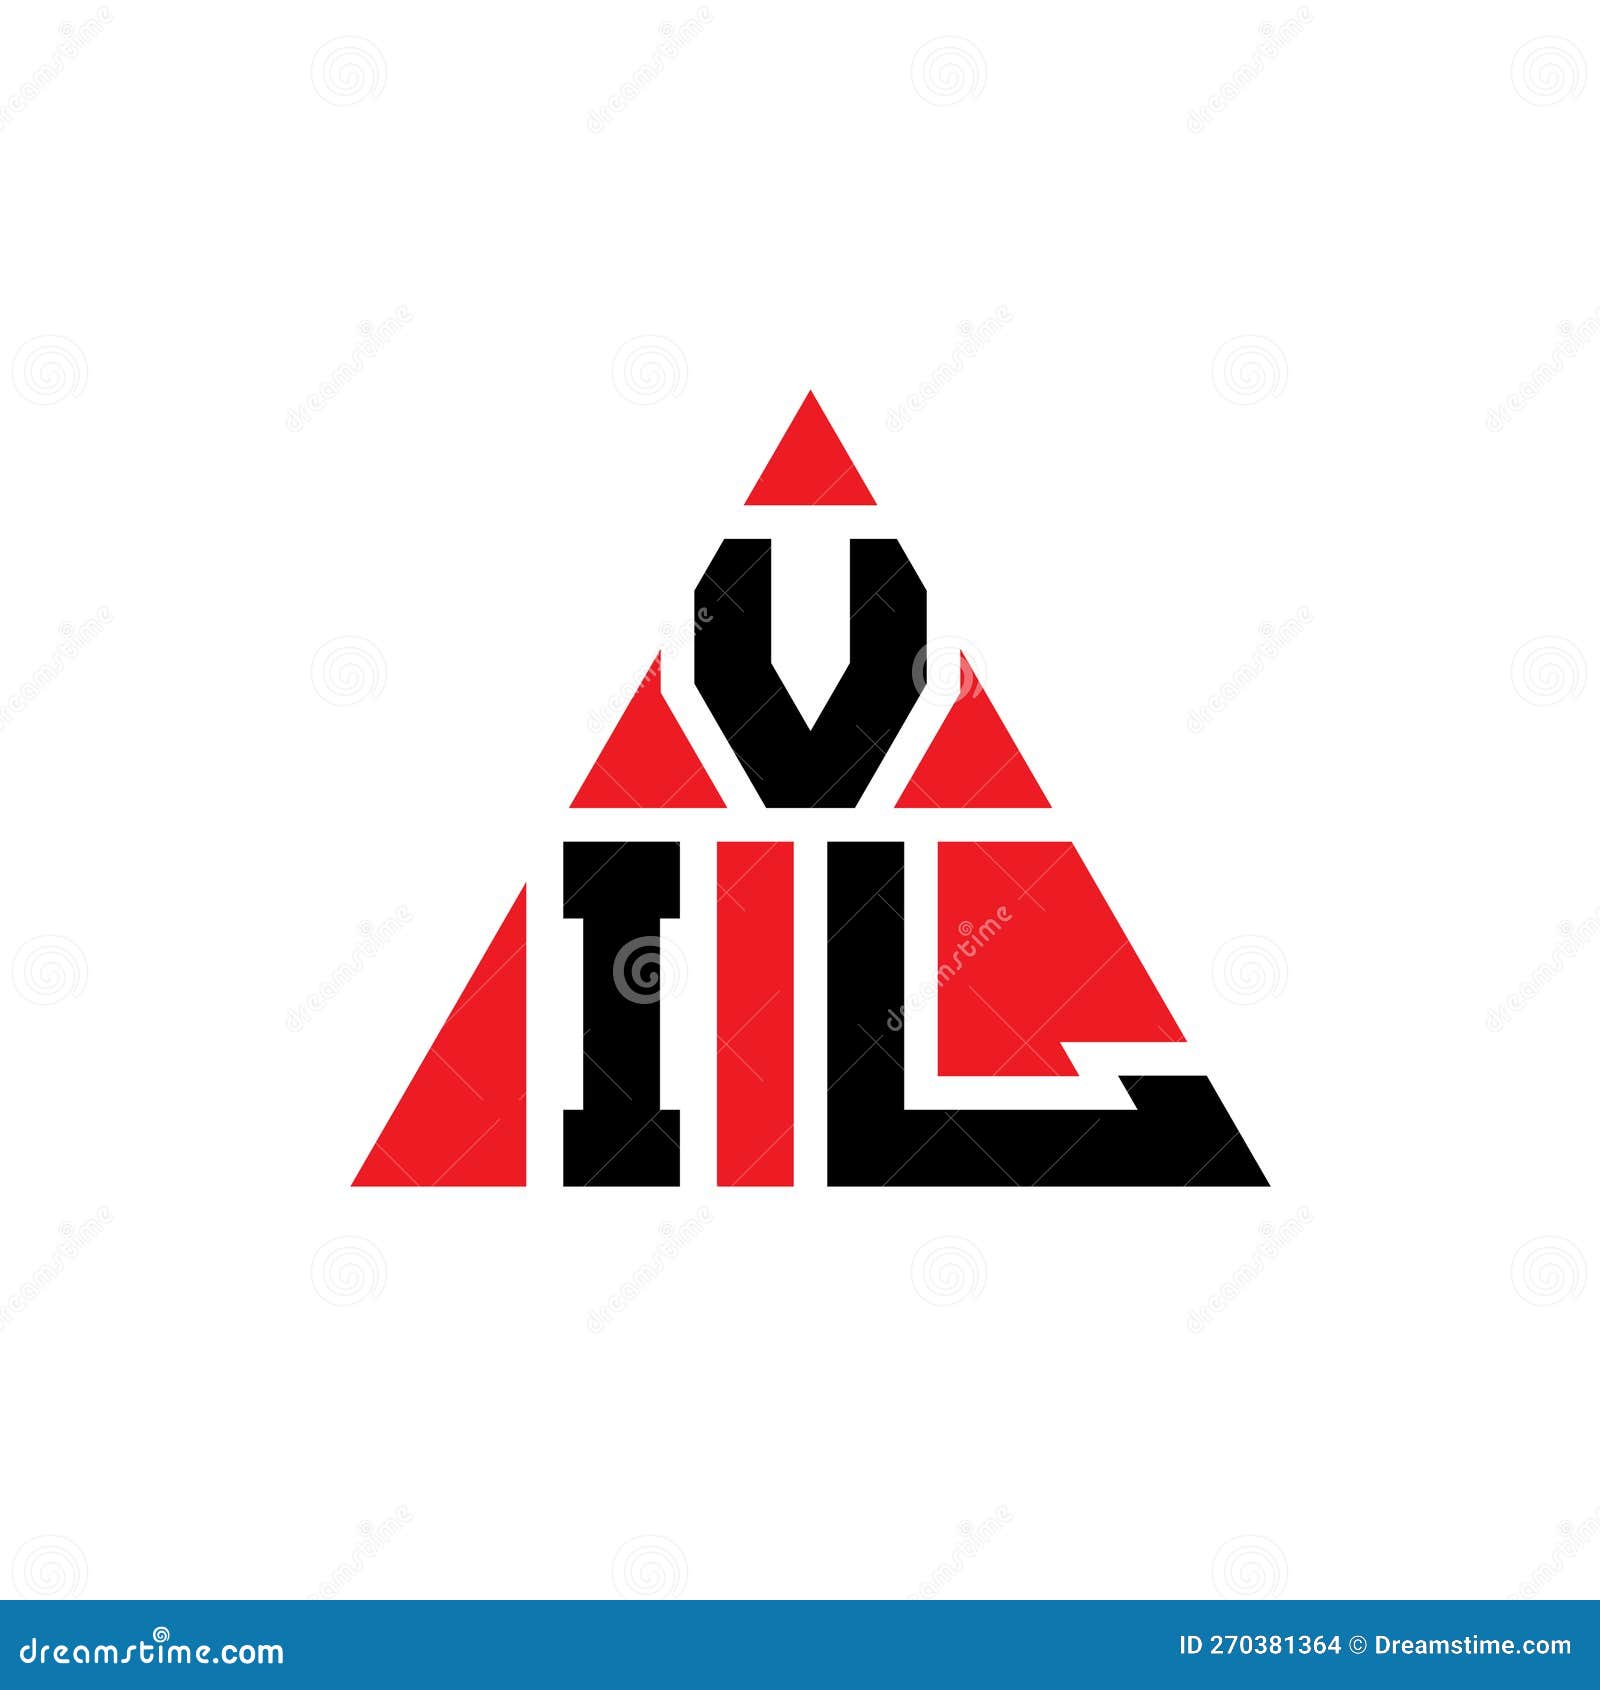 vil triangle letter logo  with triangle . vil triangle logo  monogram. vil triangle  logo template with red